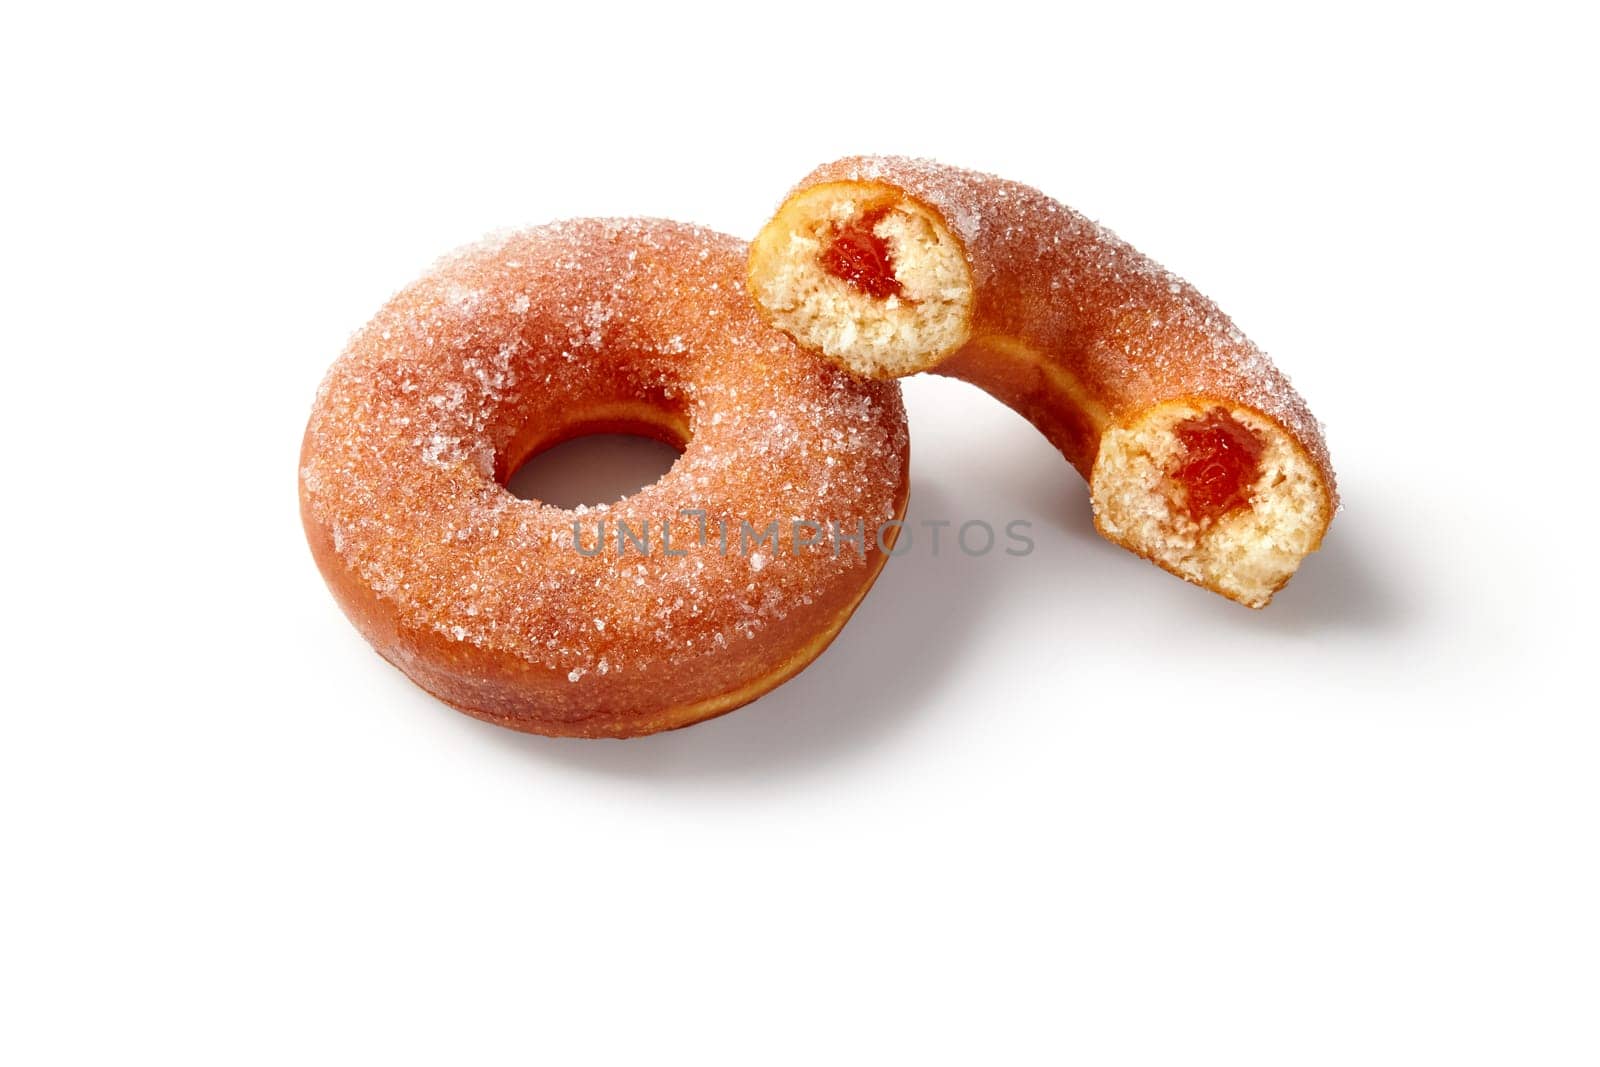 Close-up of soft fluffy sugar coated donuts with fruit jelly filling, against pure white backdrop. Concept of popular confectionery